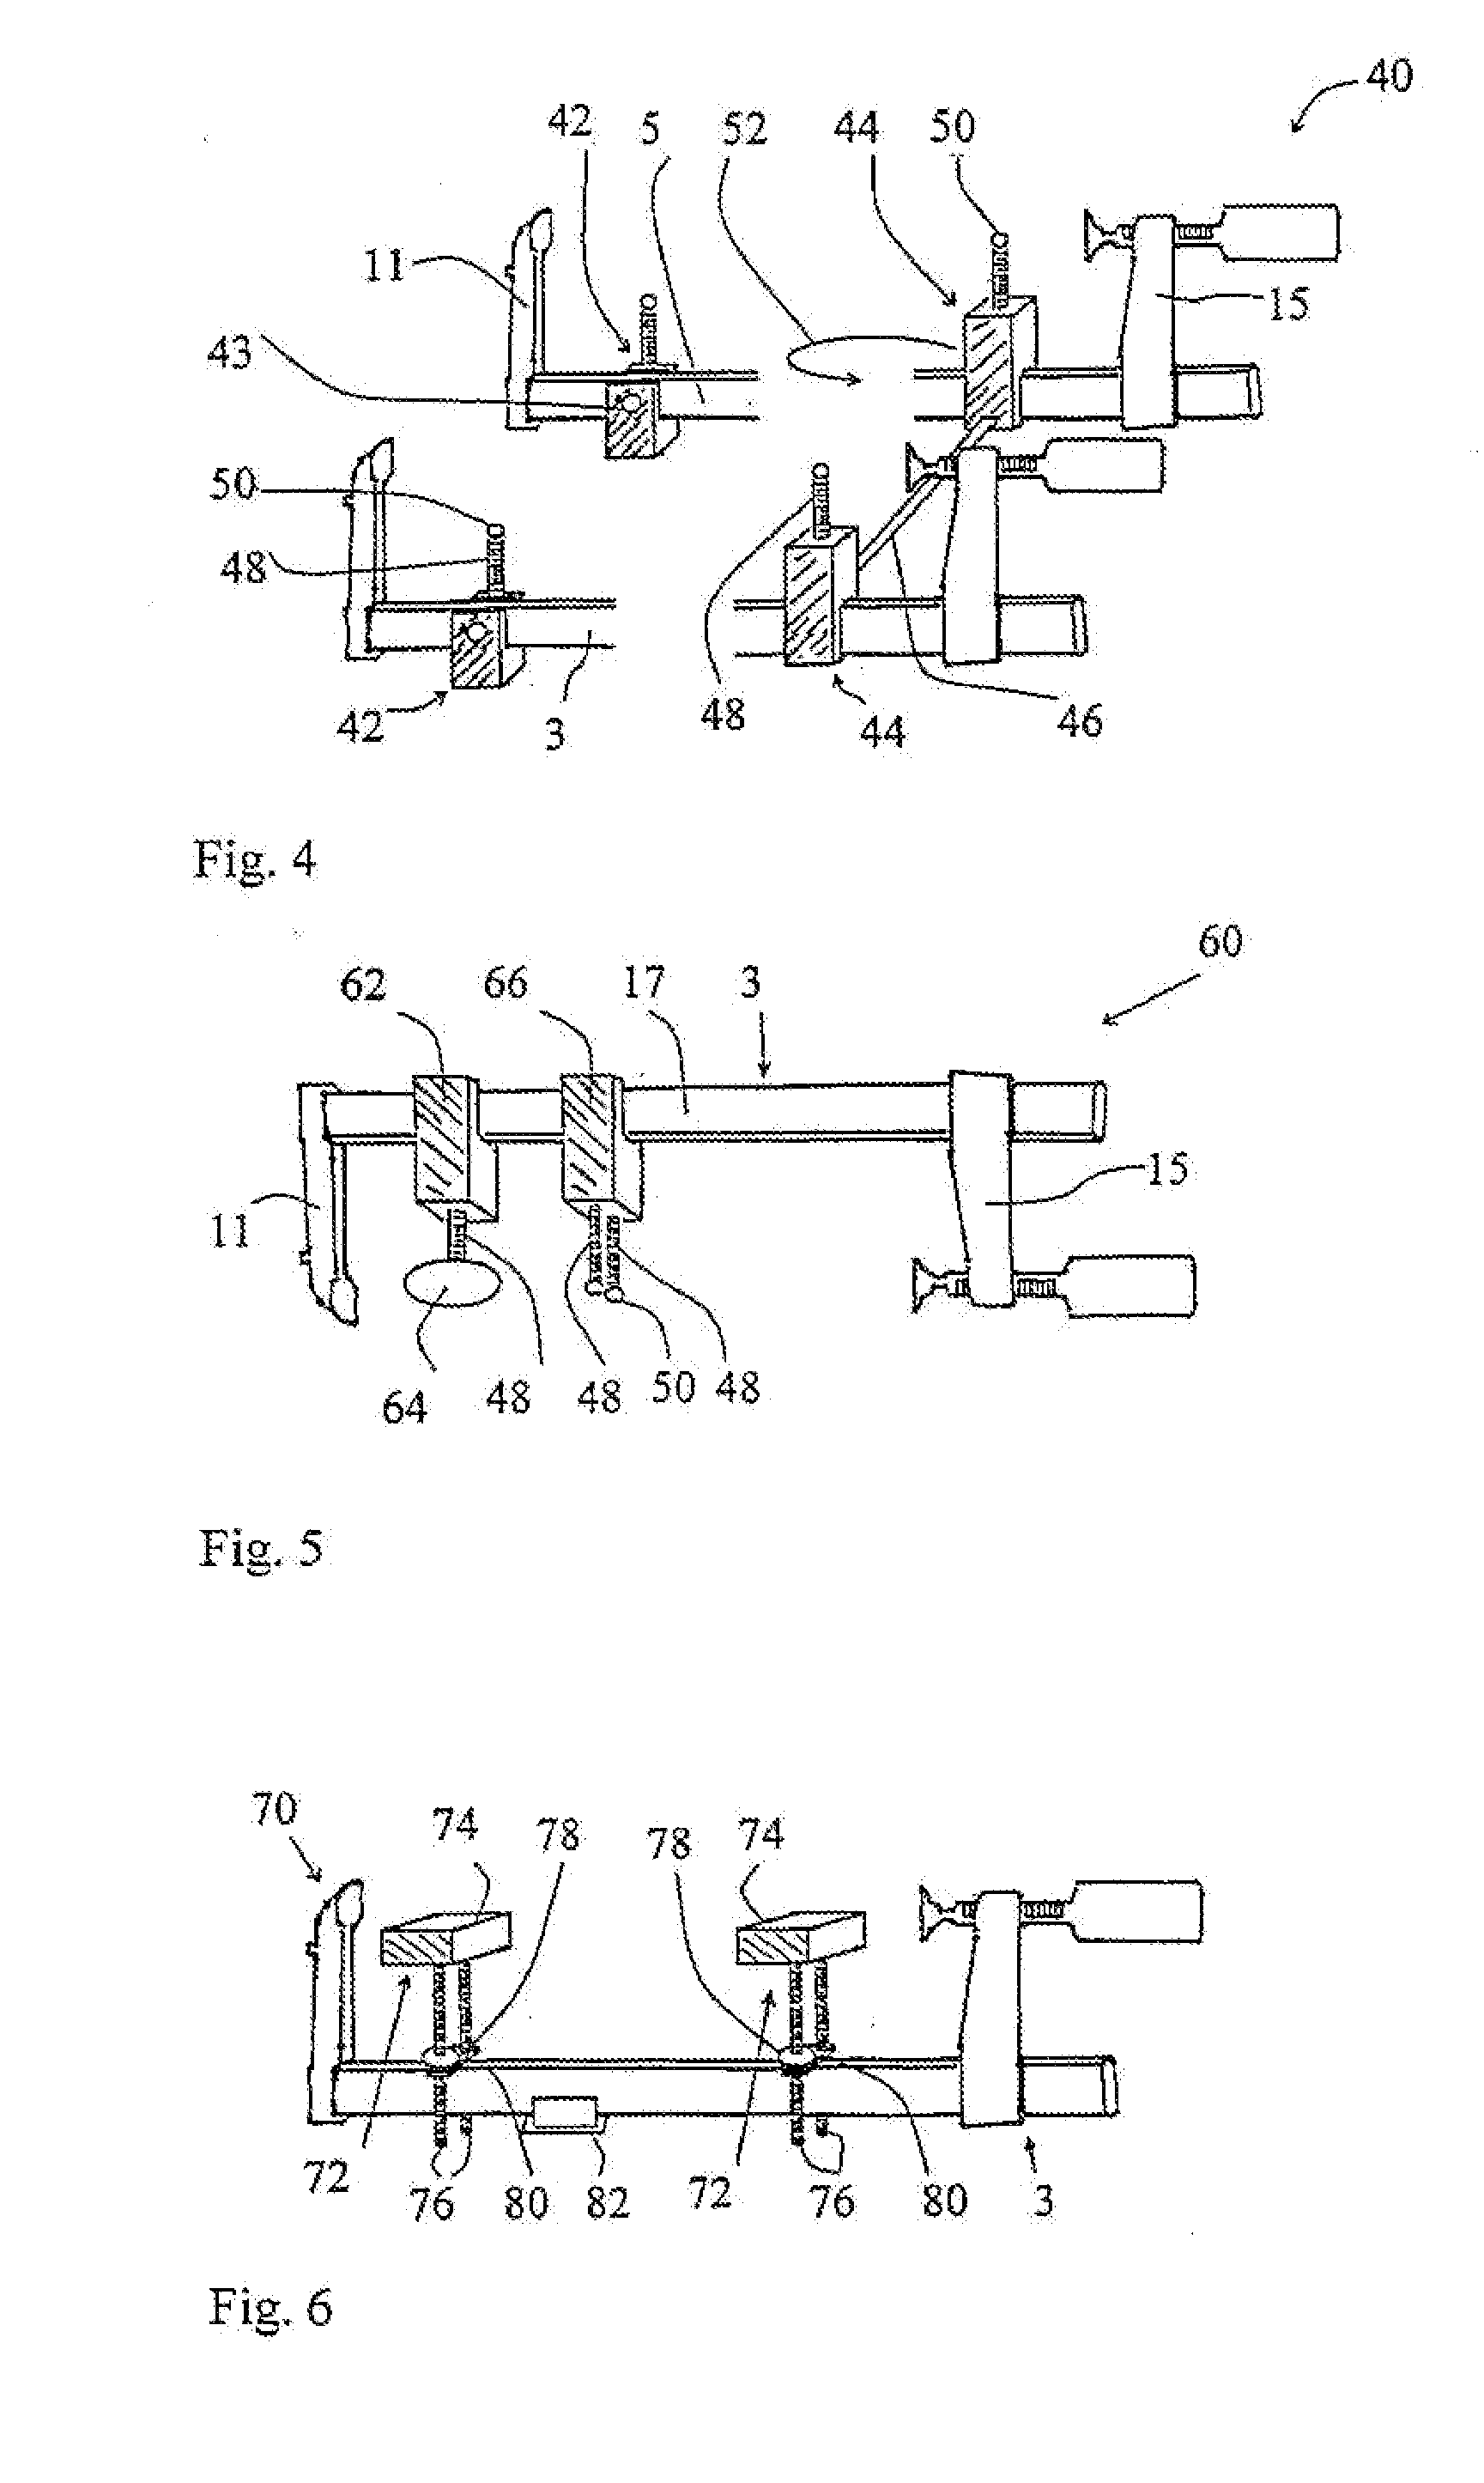 Device and arrangement for fixing workpieces